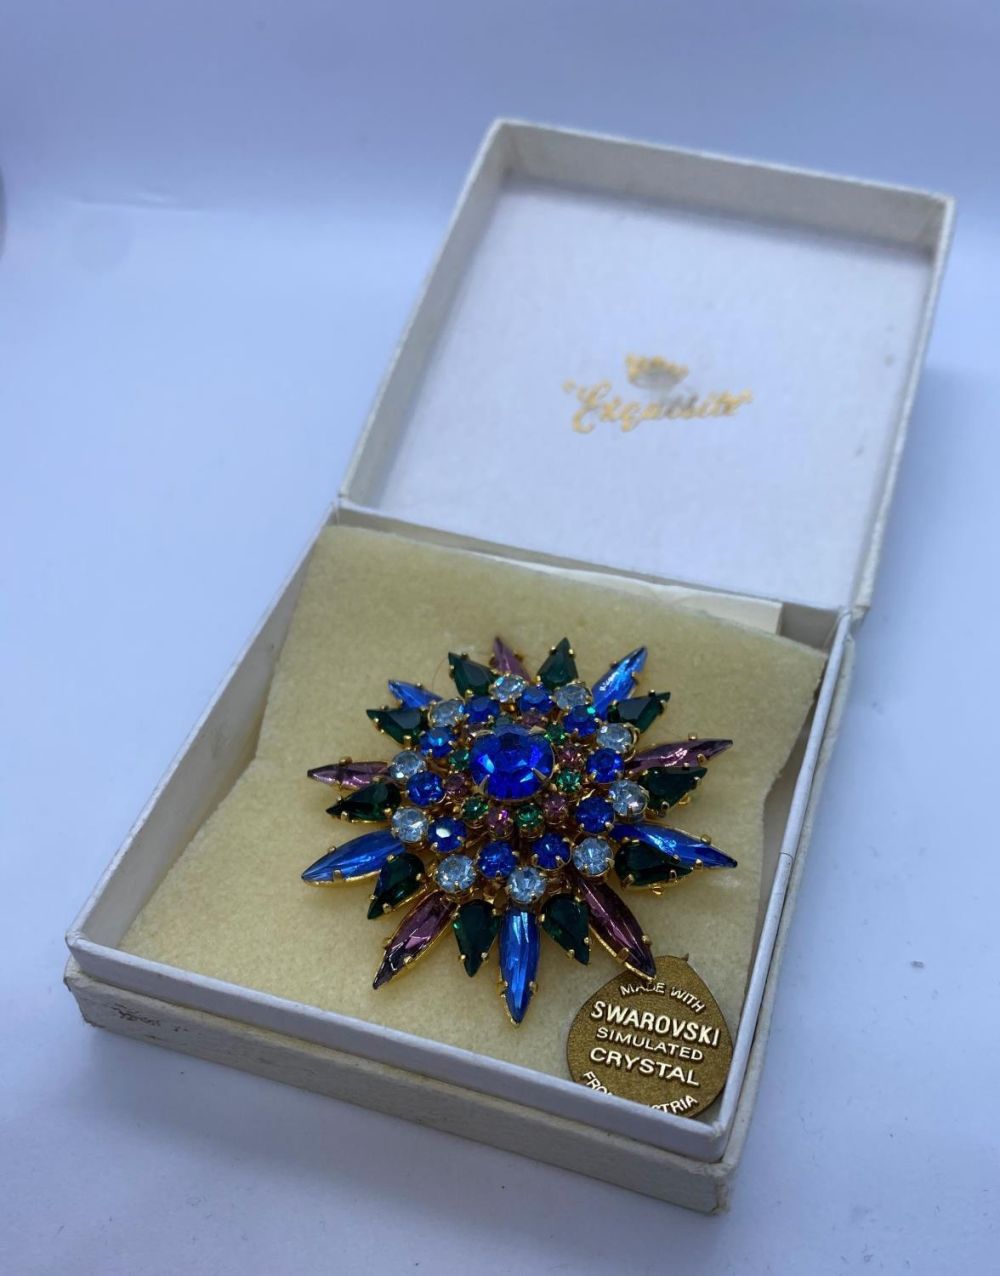 Swarovski Brooch with Coloured Stones and Labelled 'Marine' 5x5cm approx.